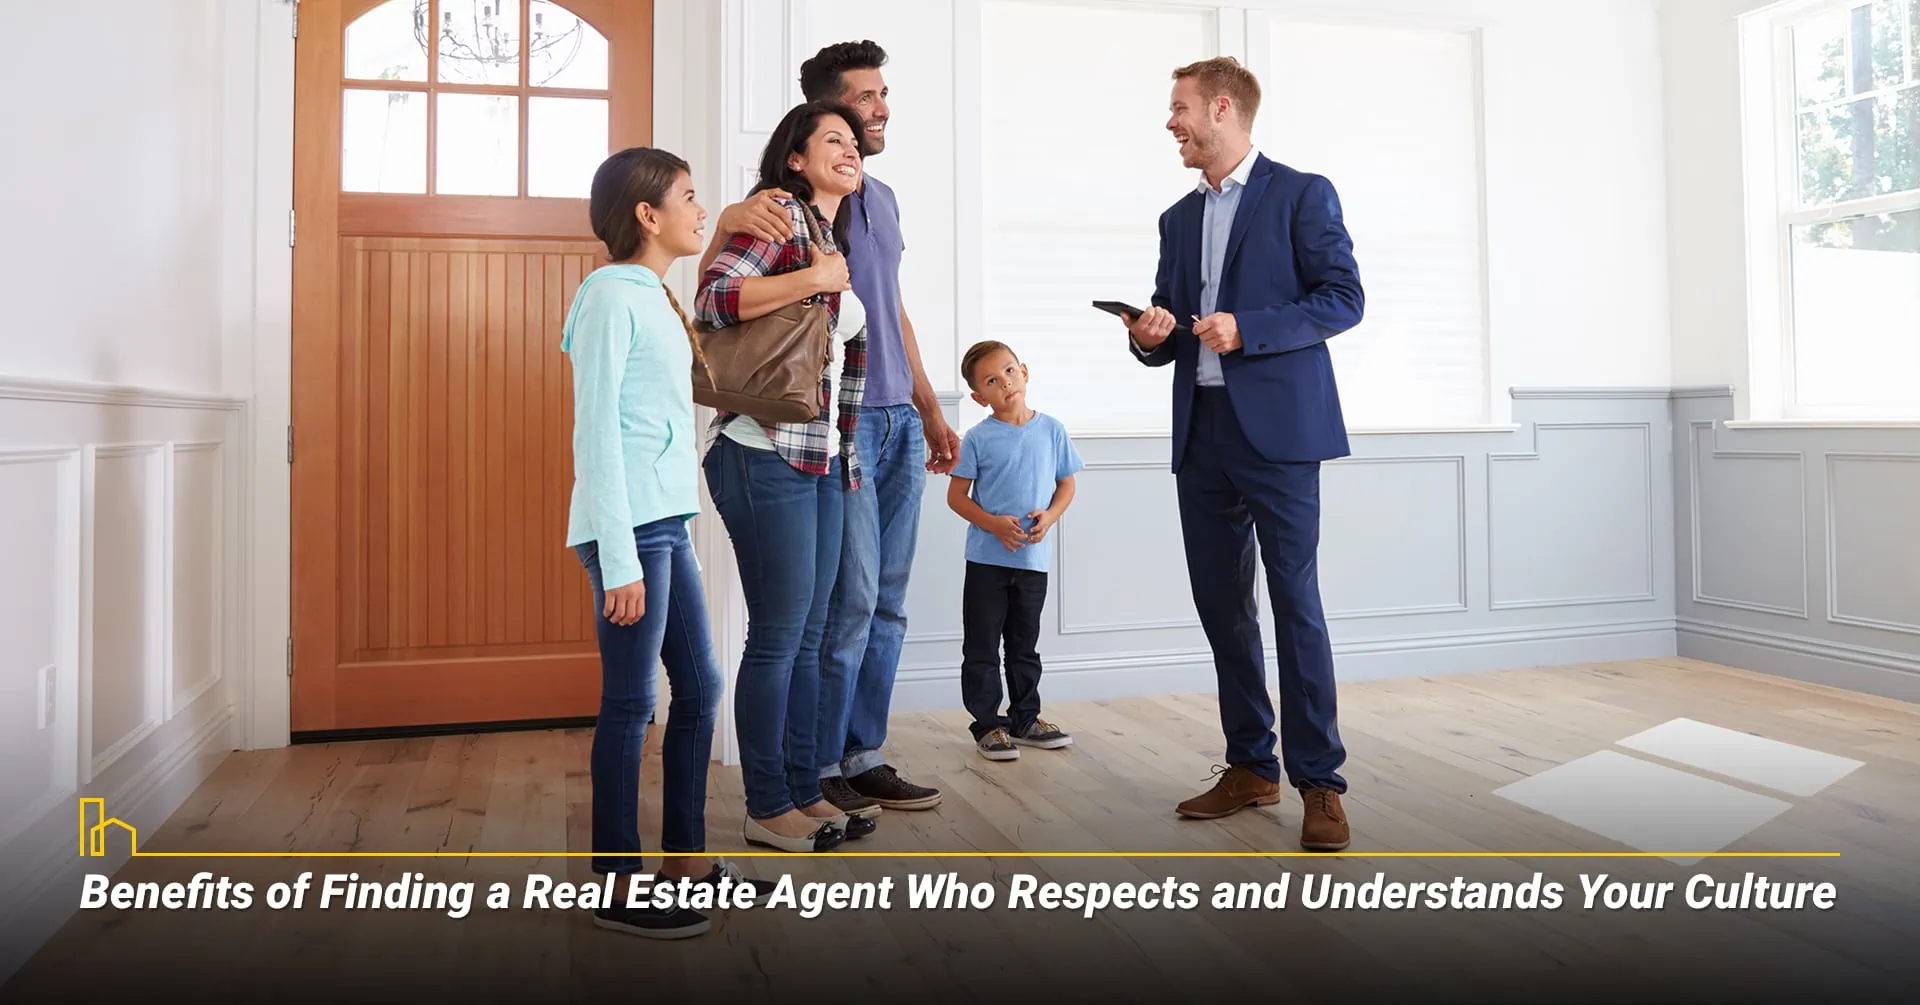 Benefits of Finding a Real Estate Agent Who Respects and Understands Your Culture